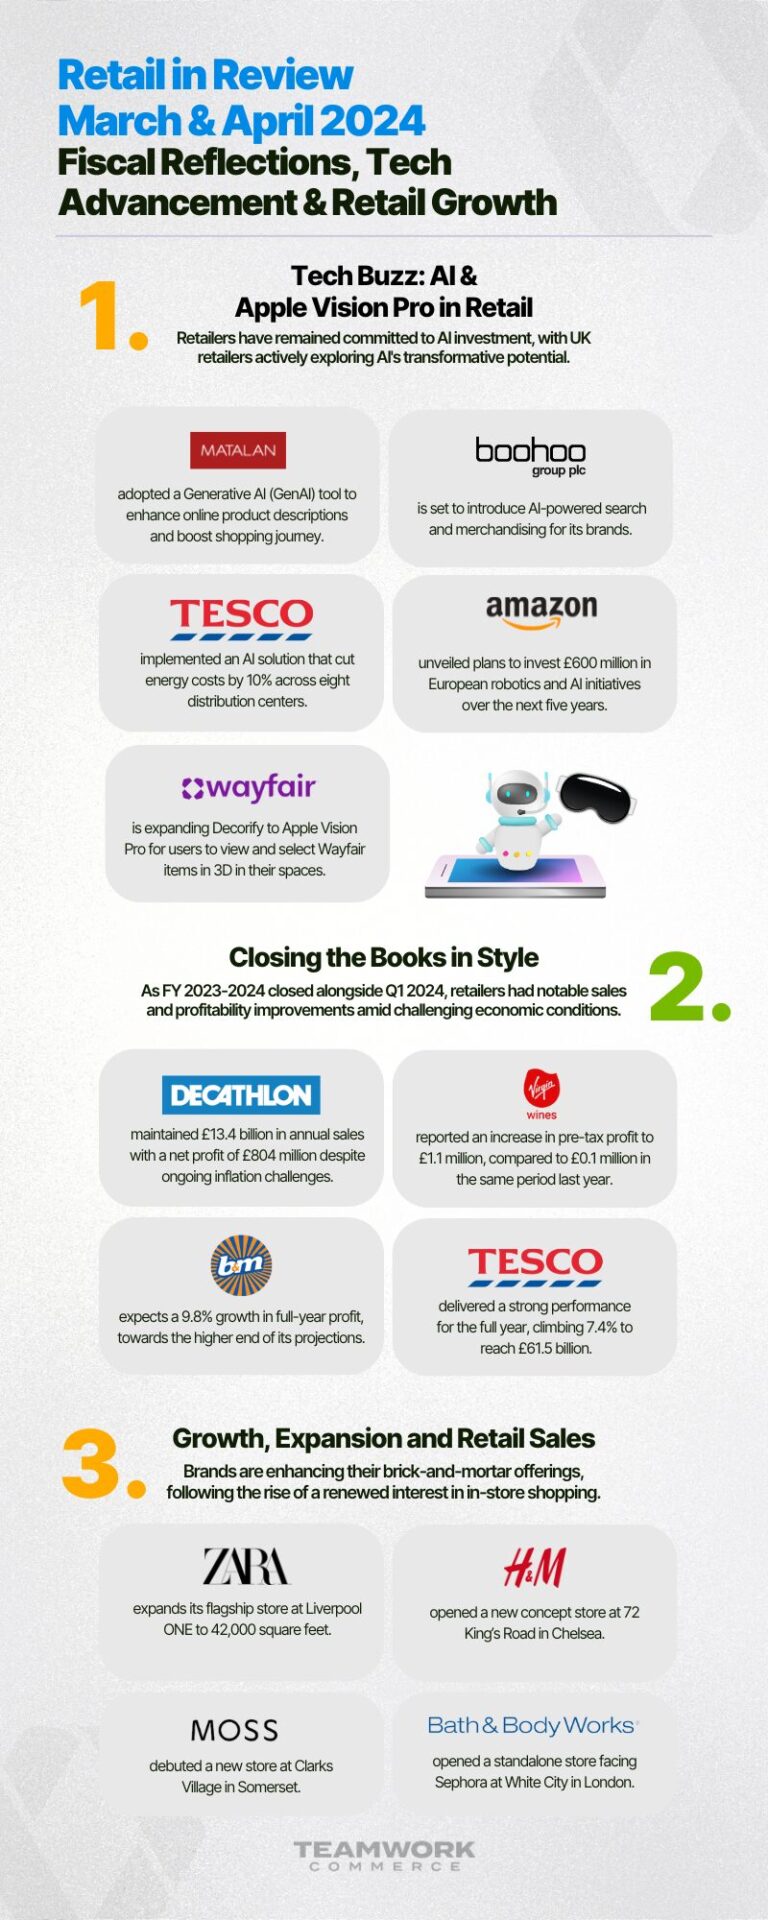 Retail in Review (March & April): Fiscal Reflections, Tech Advancement, & Retail Growth: Infographic